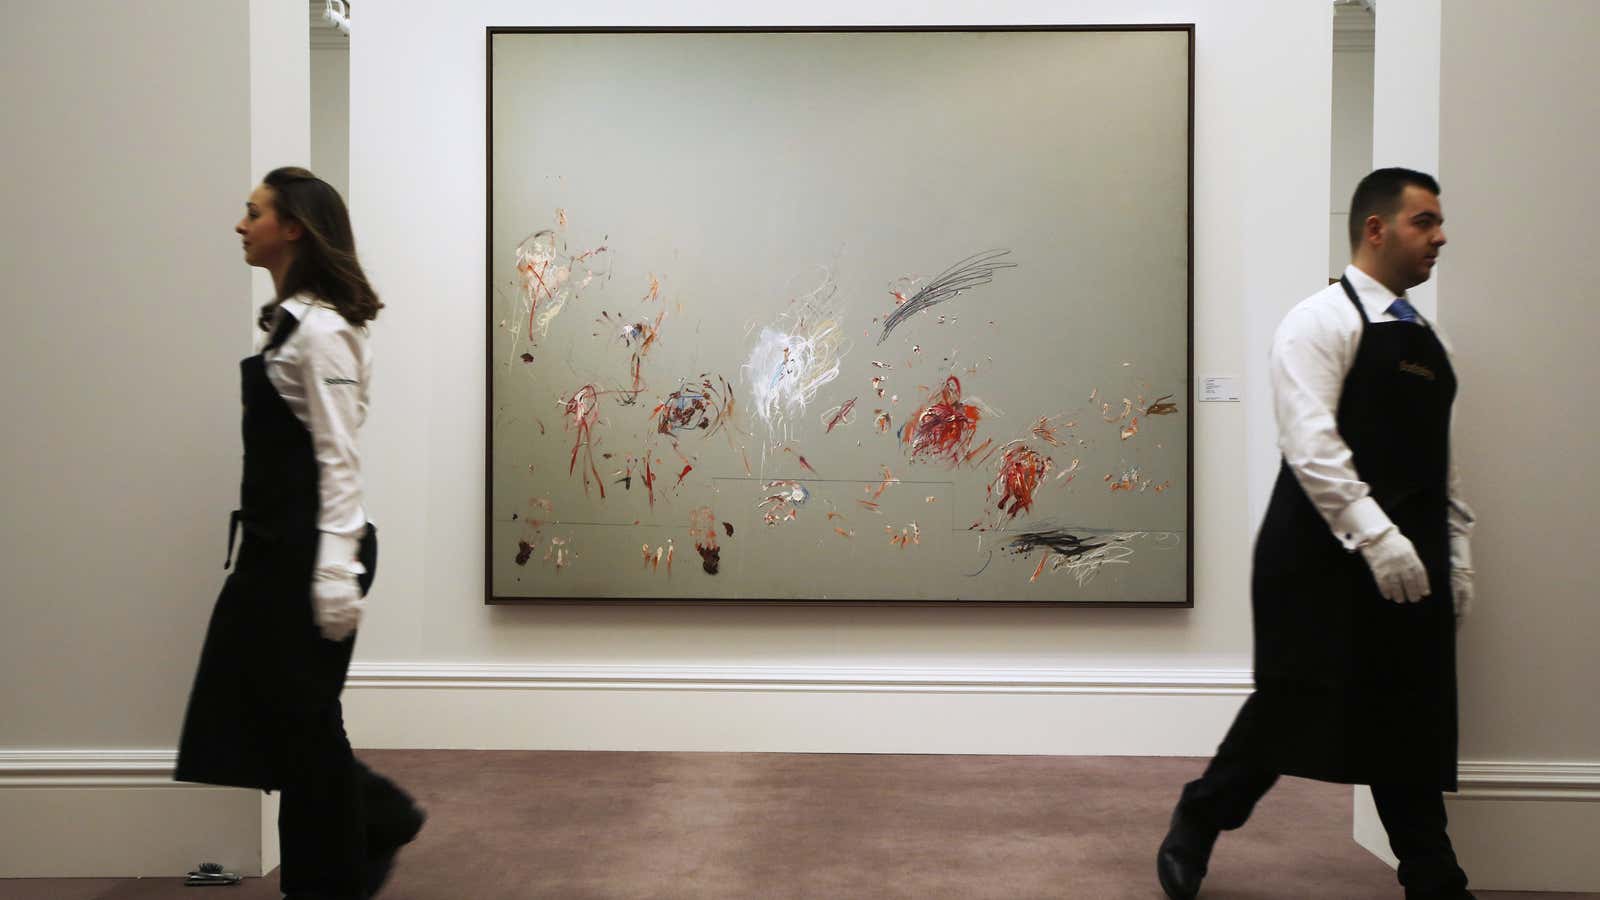 Employees pose for a photograph with artist Cy Twombly’s artwork “Untitled (Rome)” at Sotheby’s auction house in London.